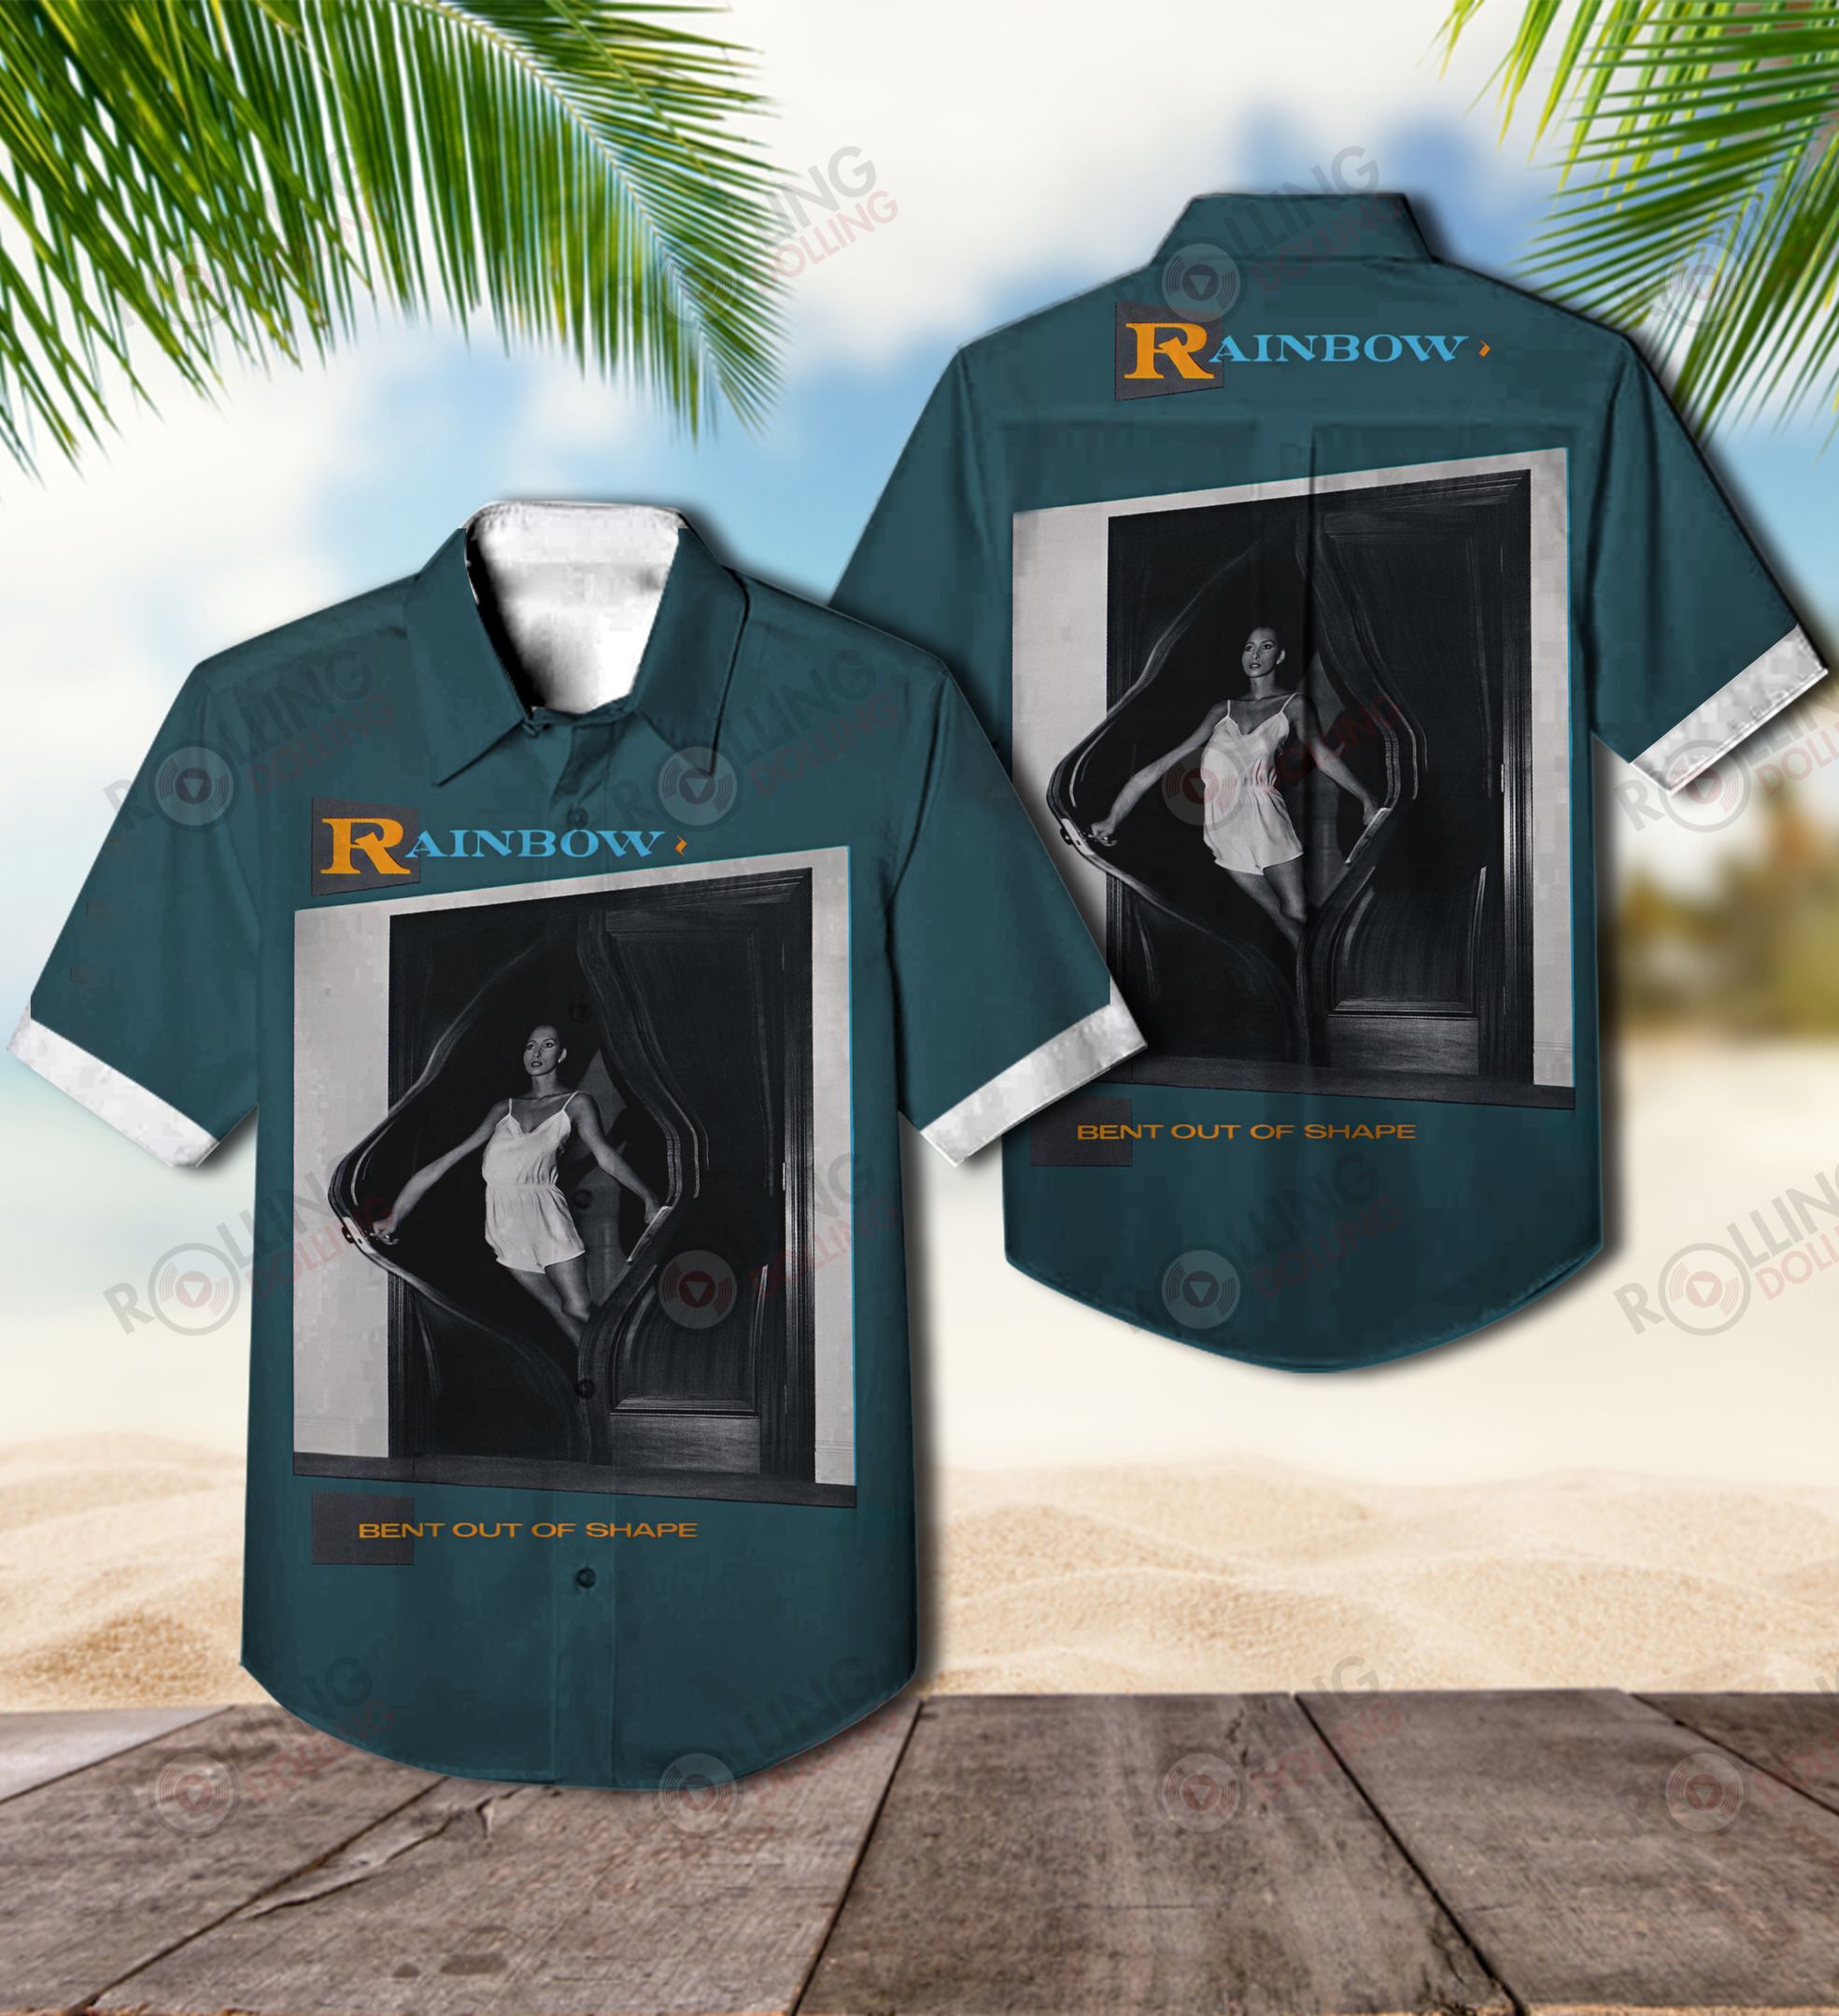 The Hawaiian Shirt is a popular shirt that is worn by Rock band fans 17